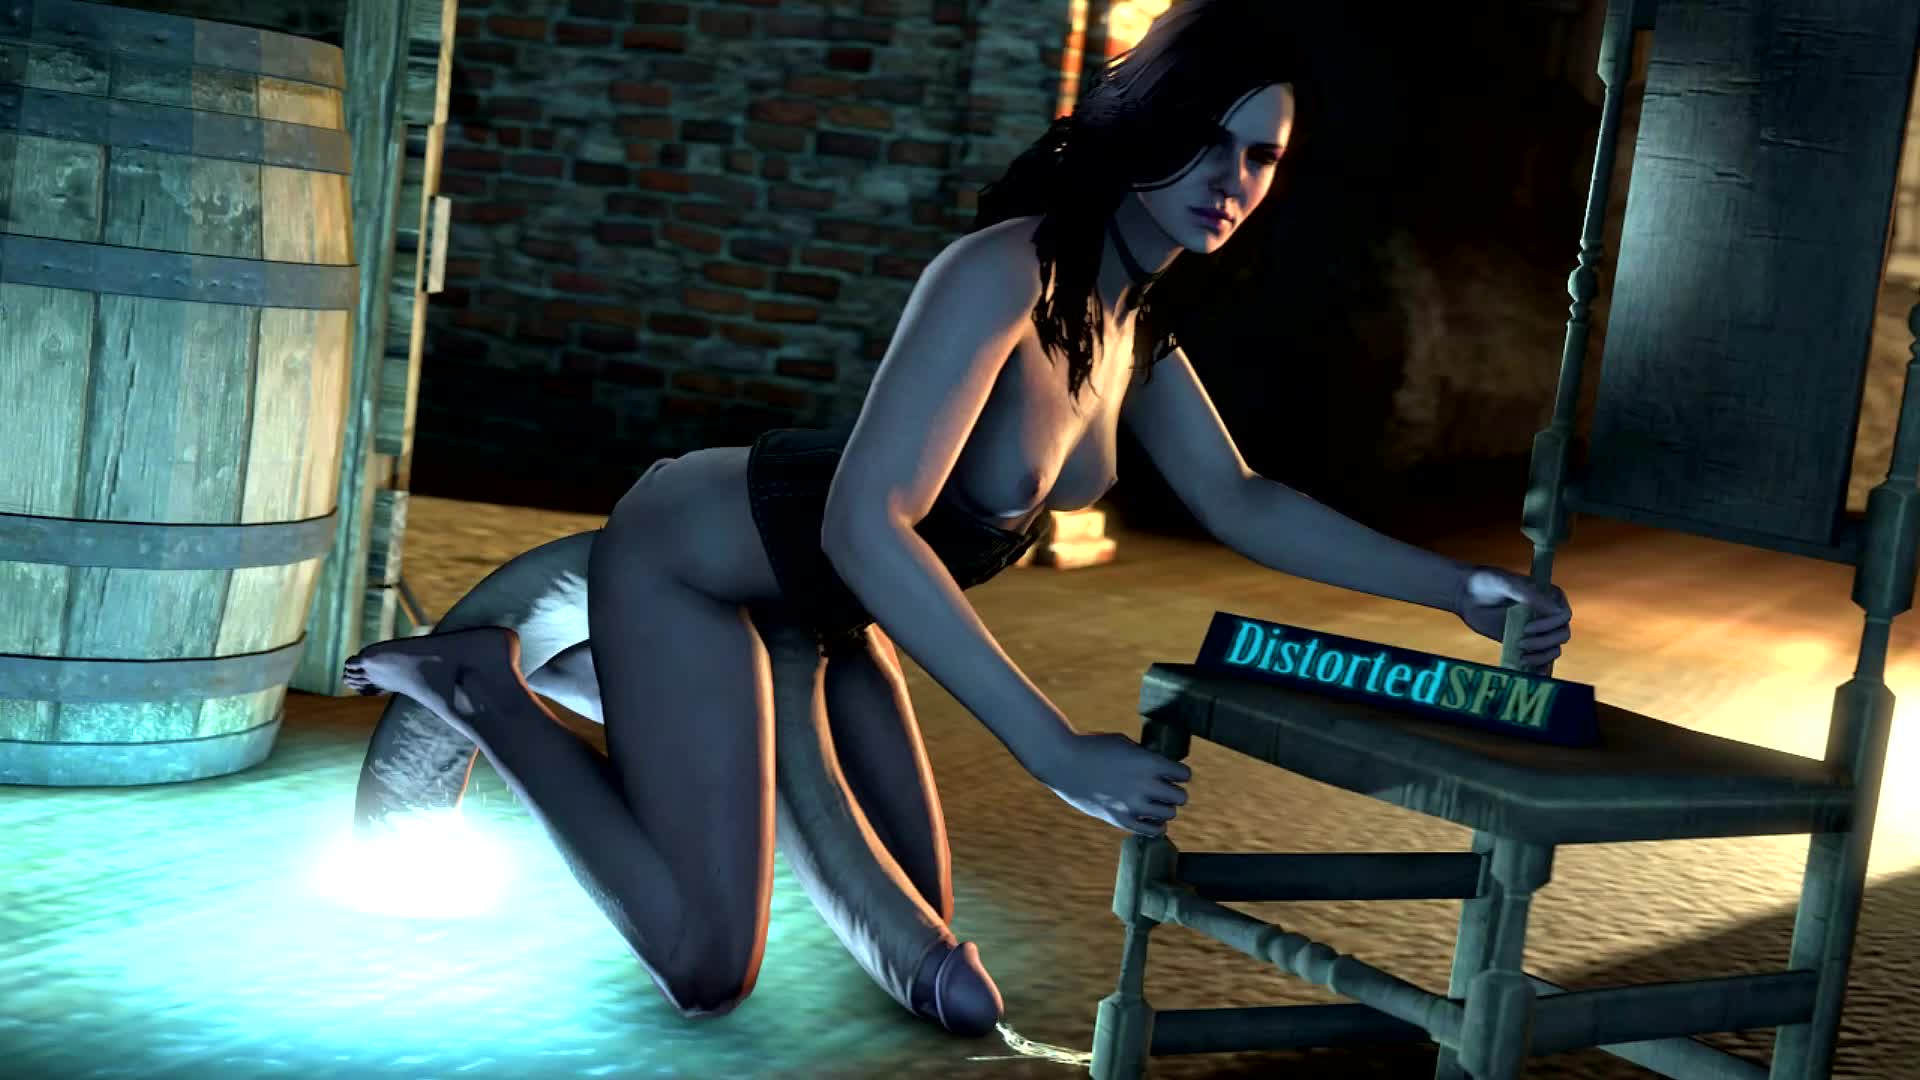 3D Animated Source_Filmmaker The_Witcher The_Witcher_3:_Wild_Hunt Yennefer distortedsfm // 1920x1080 // 14.9MB // mp4